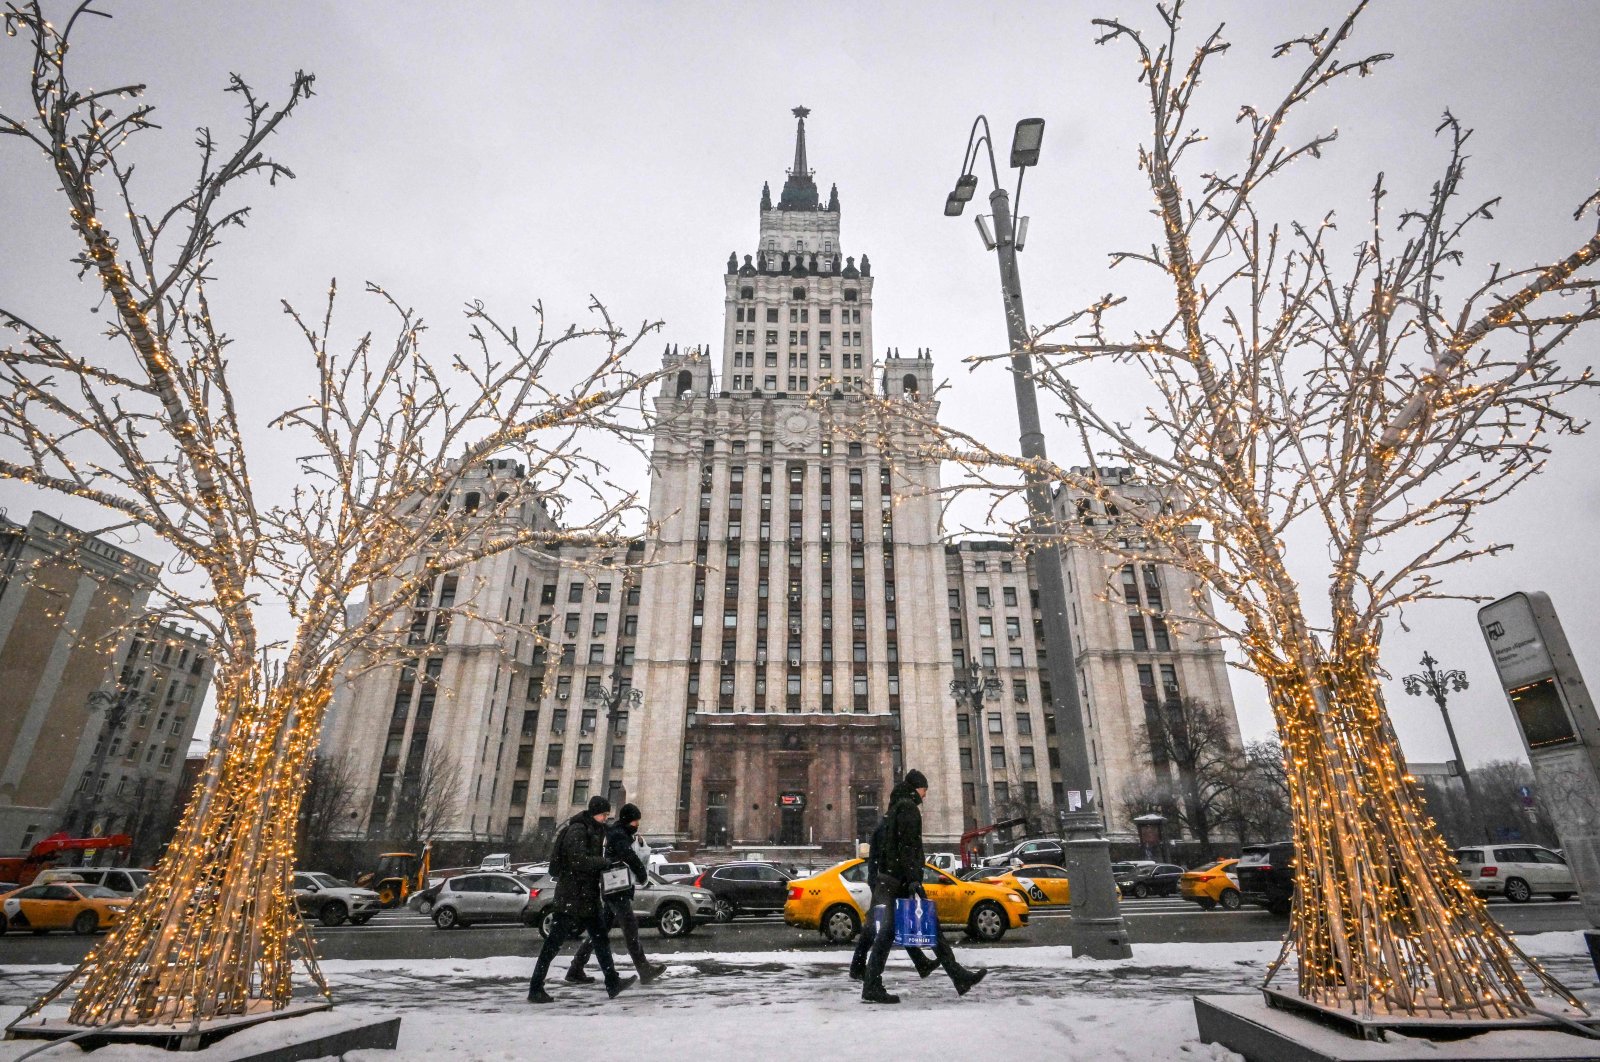 Pedestrians walk past Christmas and New Year decorations in front of the Red Gate Building Stalin-era skyscraper in Moscow, Russia, Dec. 28, 2022. (AFP Photo)